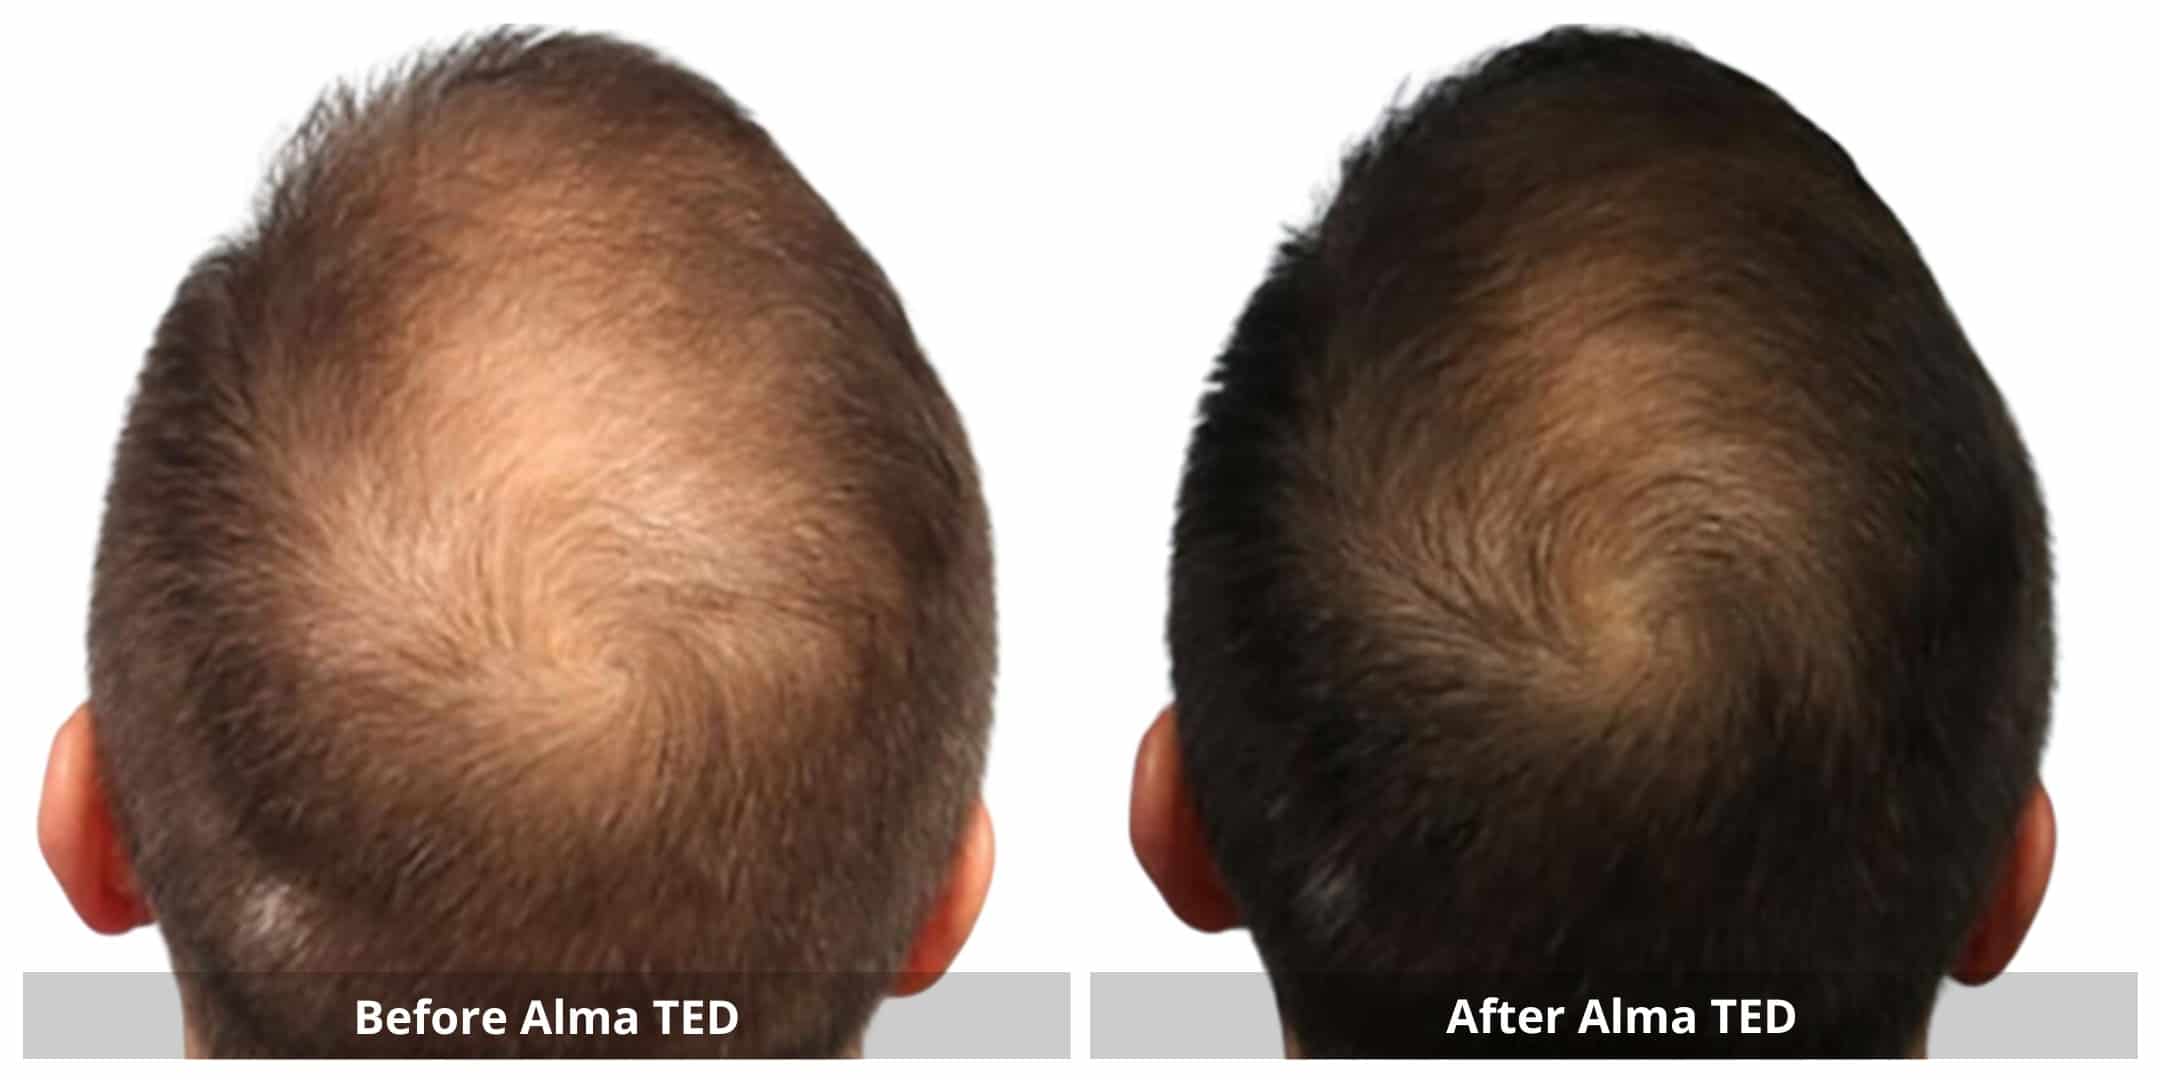 Alma ted hair restoration before and after photo 1